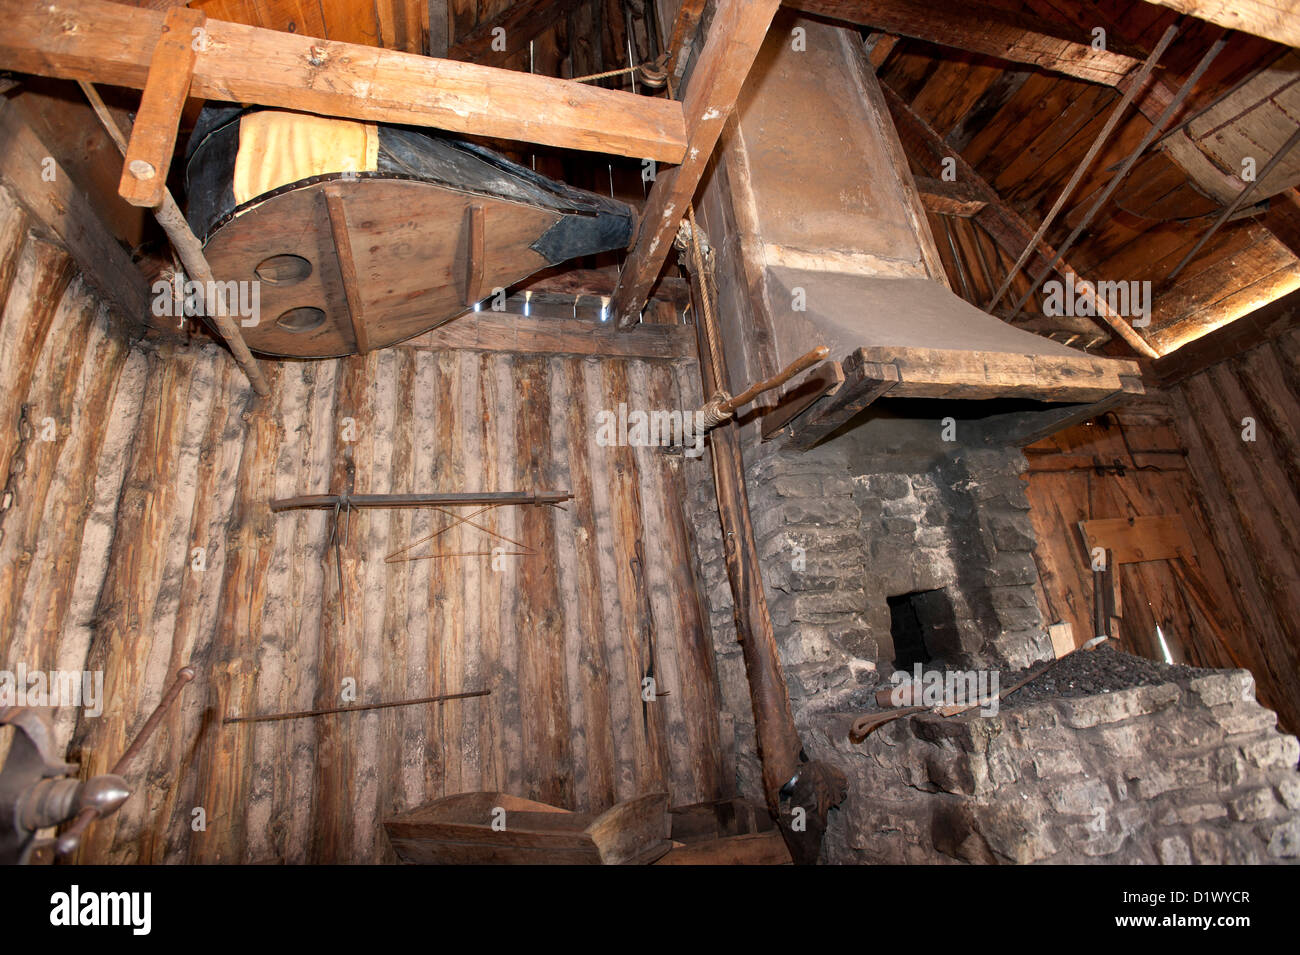 Replica of blacksmith shop found in a 17th century French Jesuit Mission. Stock Photo